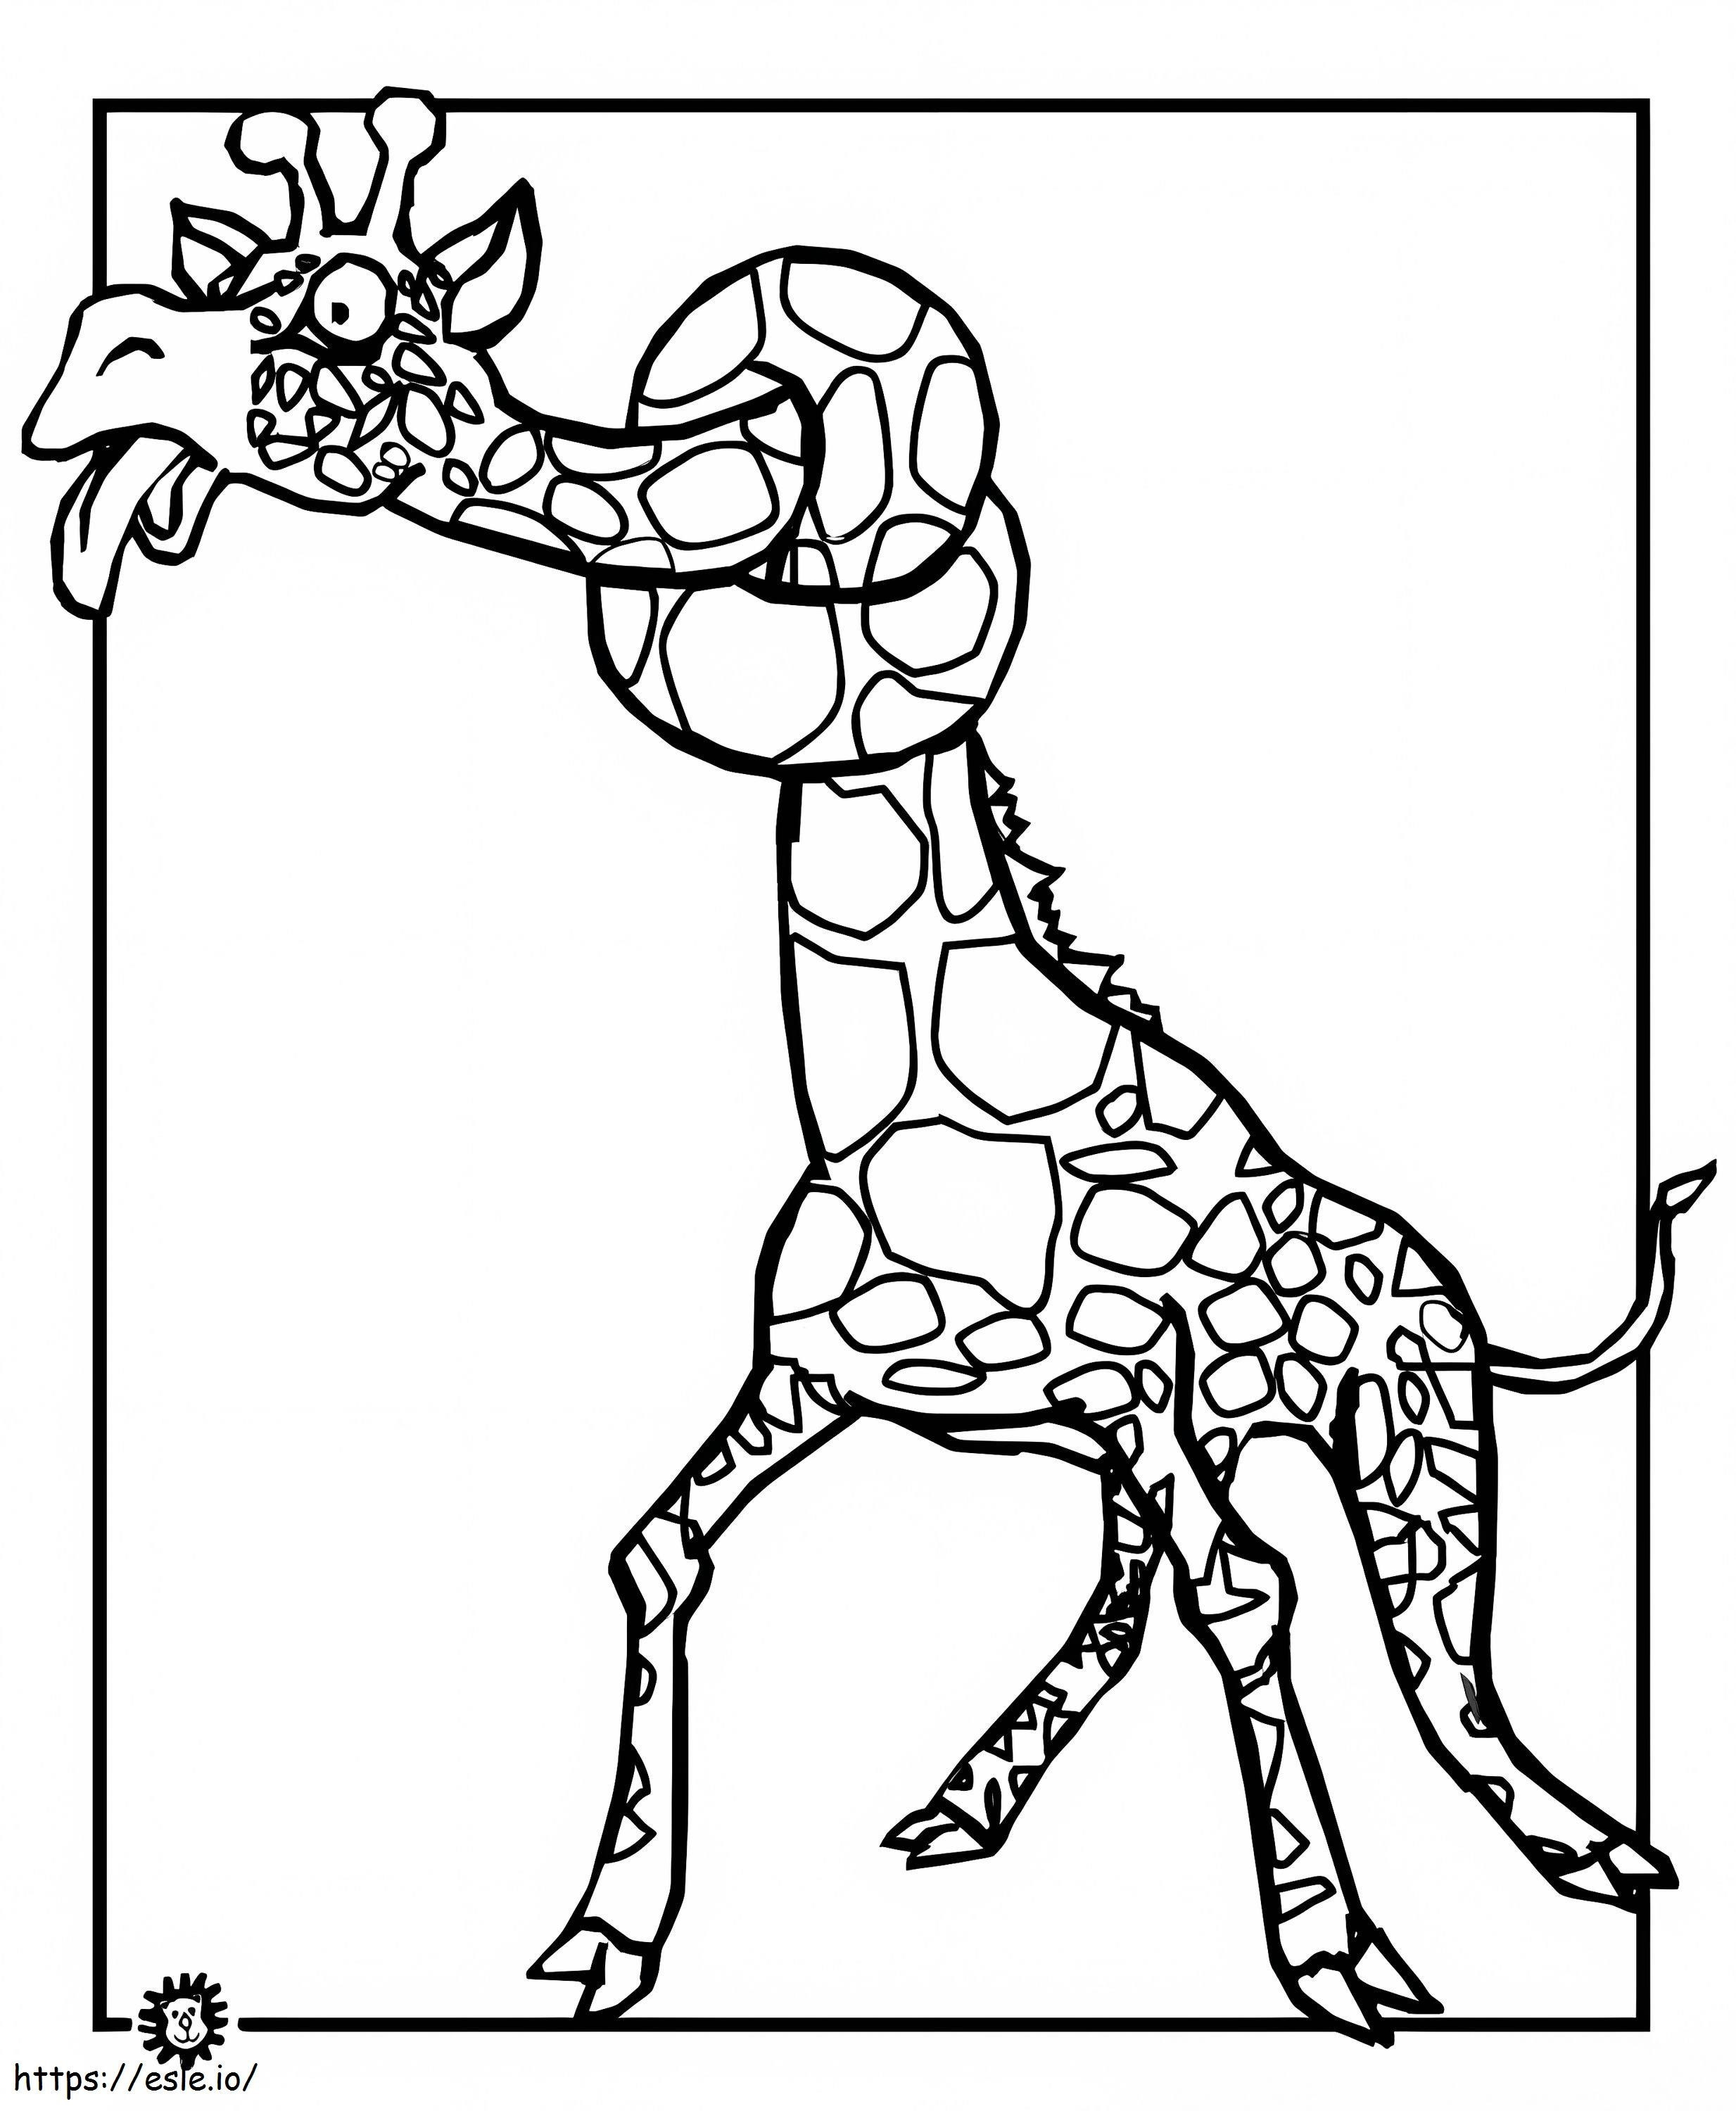 Funny Giraffe coloring page